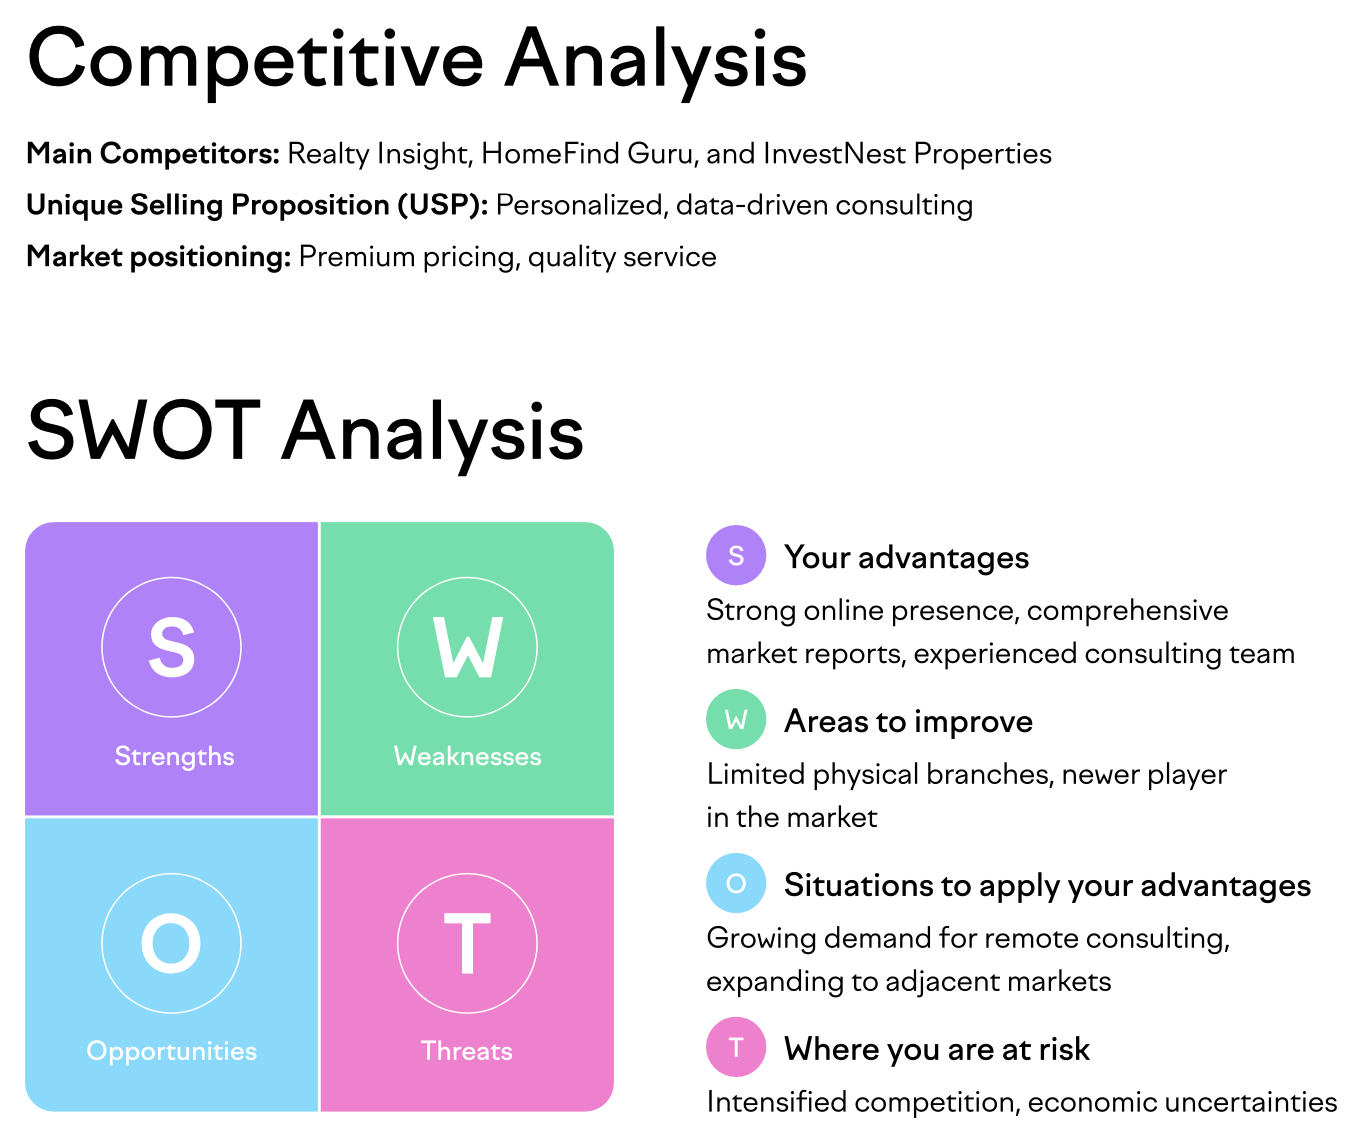 A competitive and SWOT analysis for the real estate consulting business from the marketing plan sample